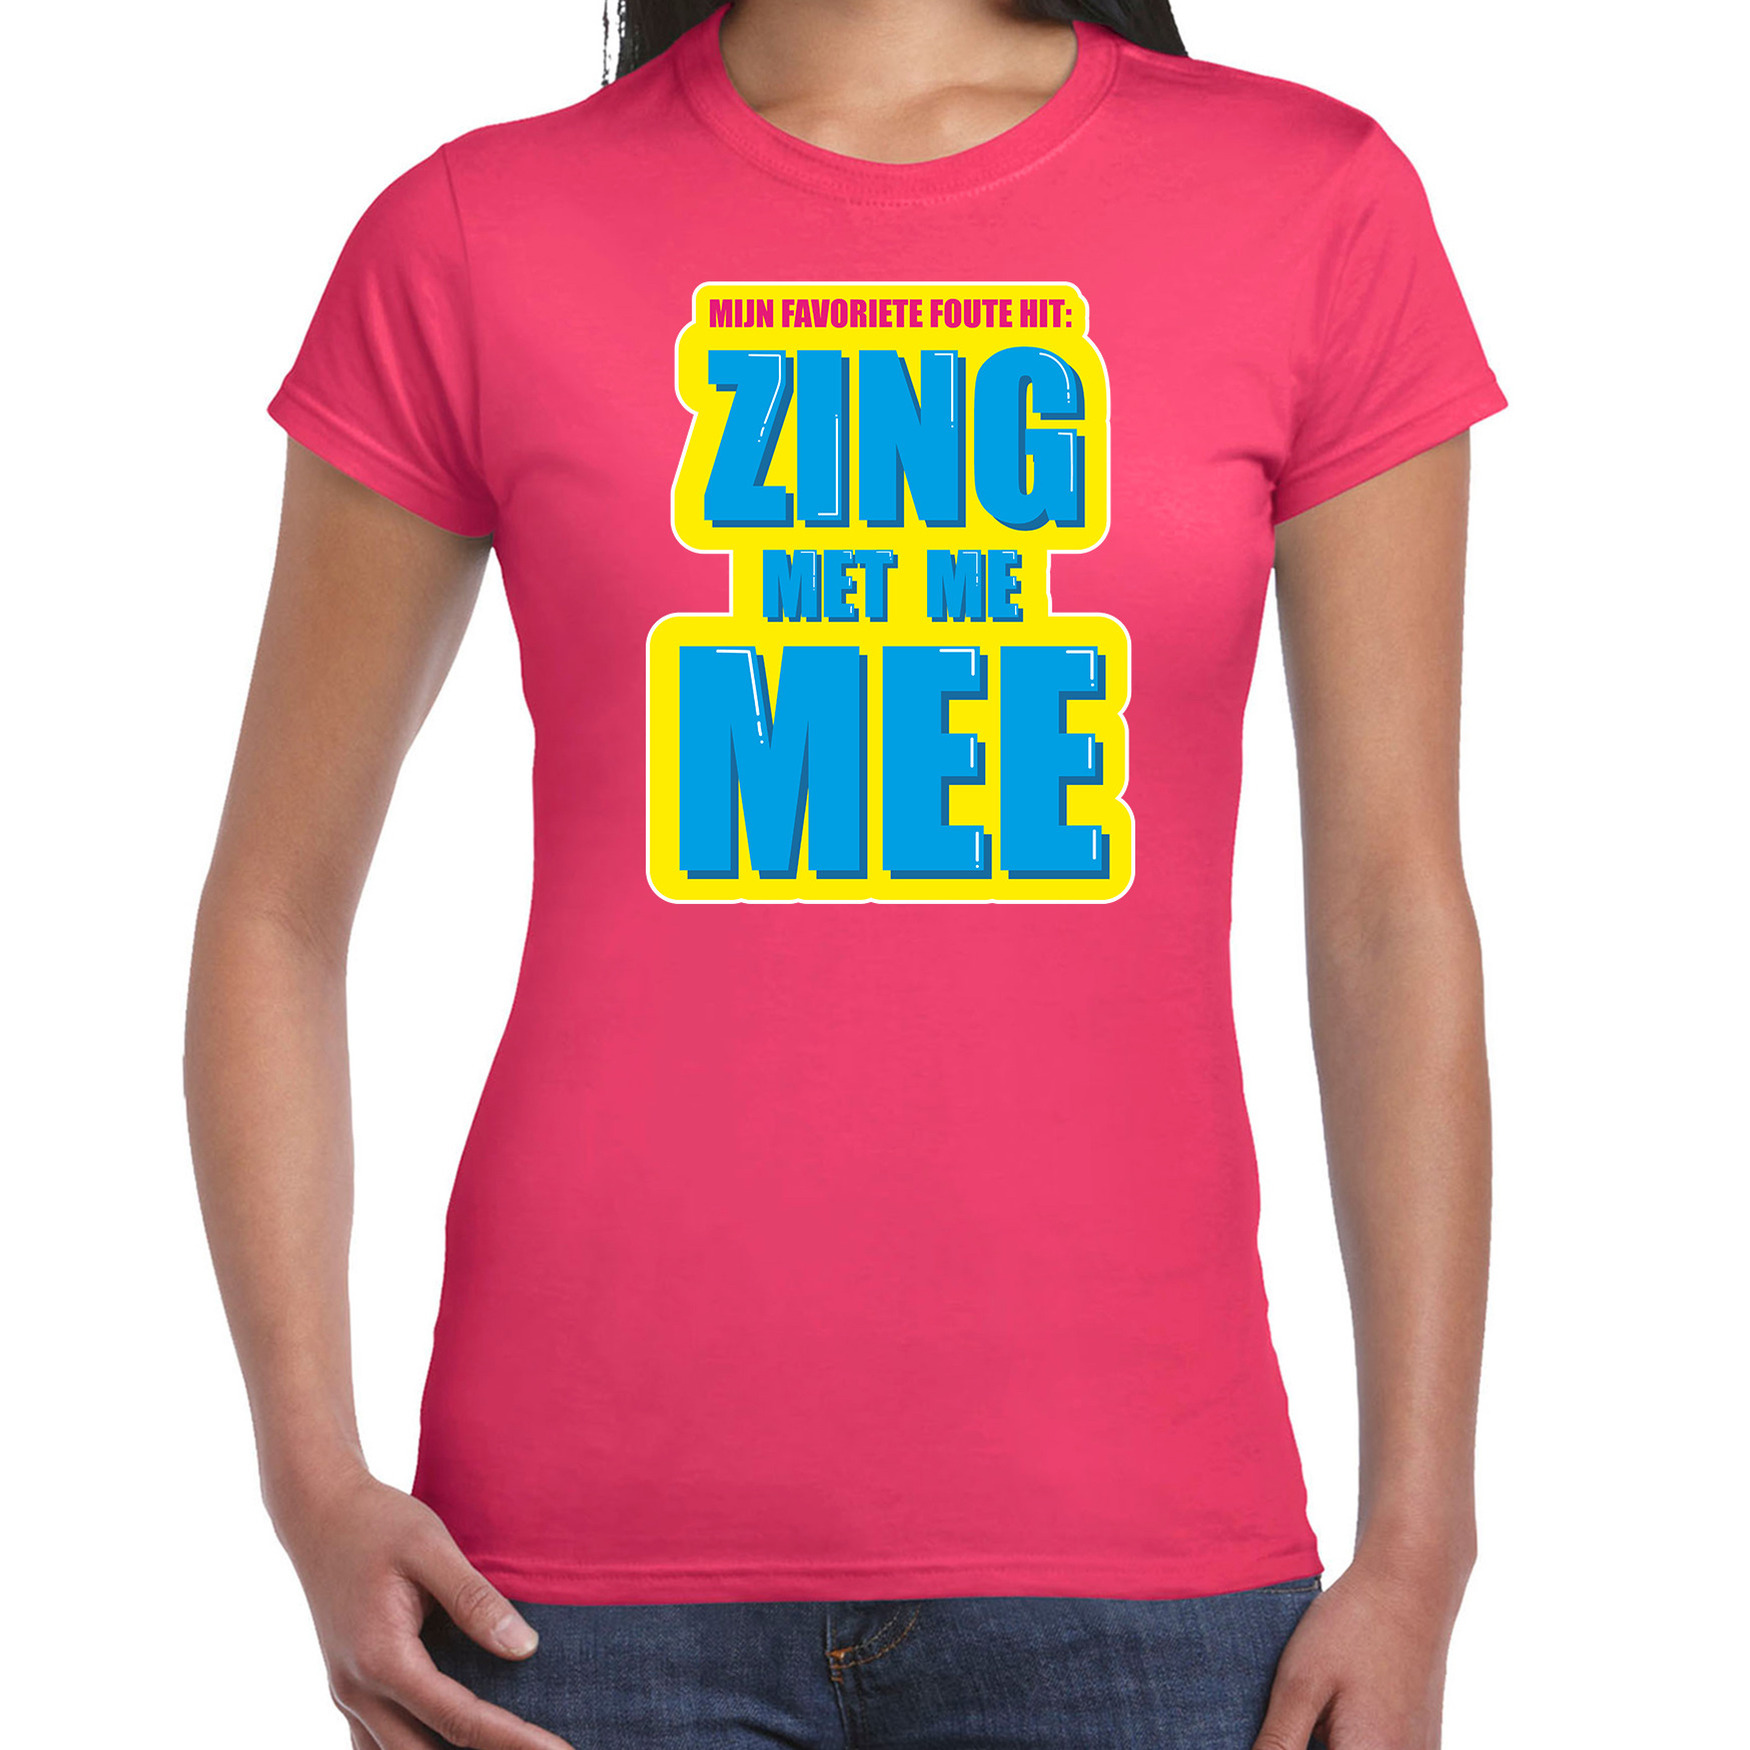 Foute party Zing met me mee verkleed t-shirt roze dames Foute party hits outfit- kleding